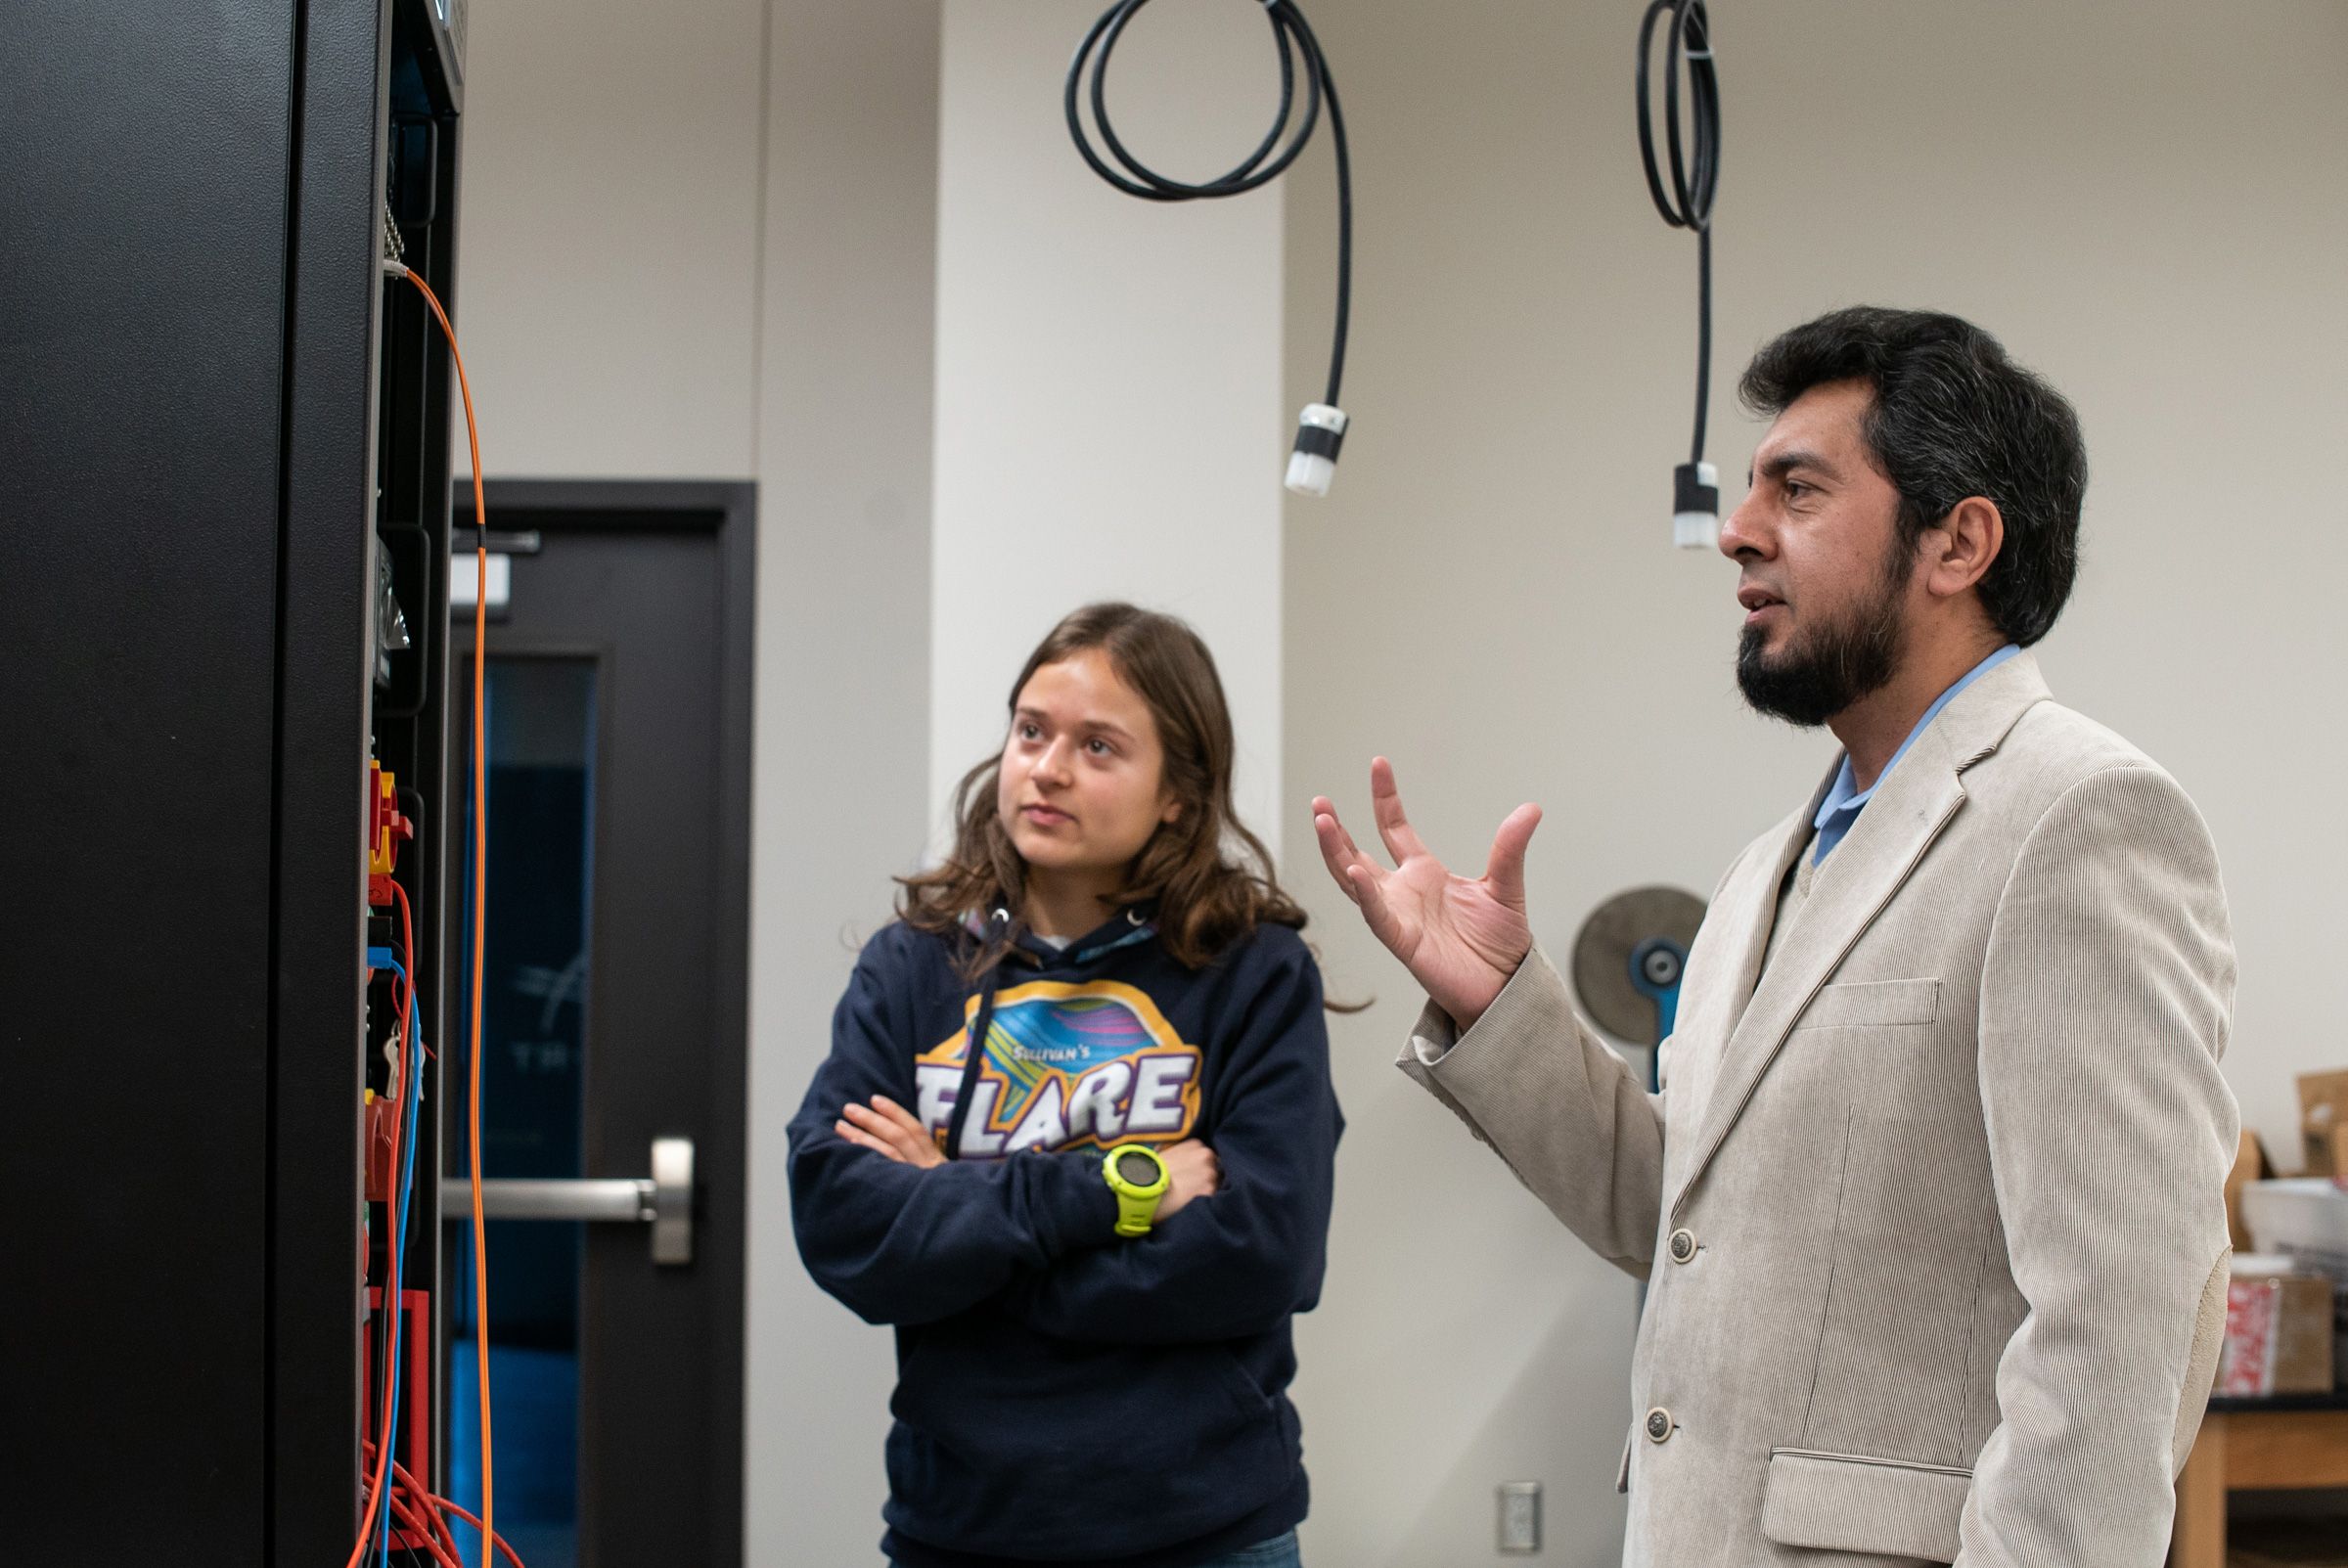 Dr. Beg showing a student how to use equipment in electrical engineering lab